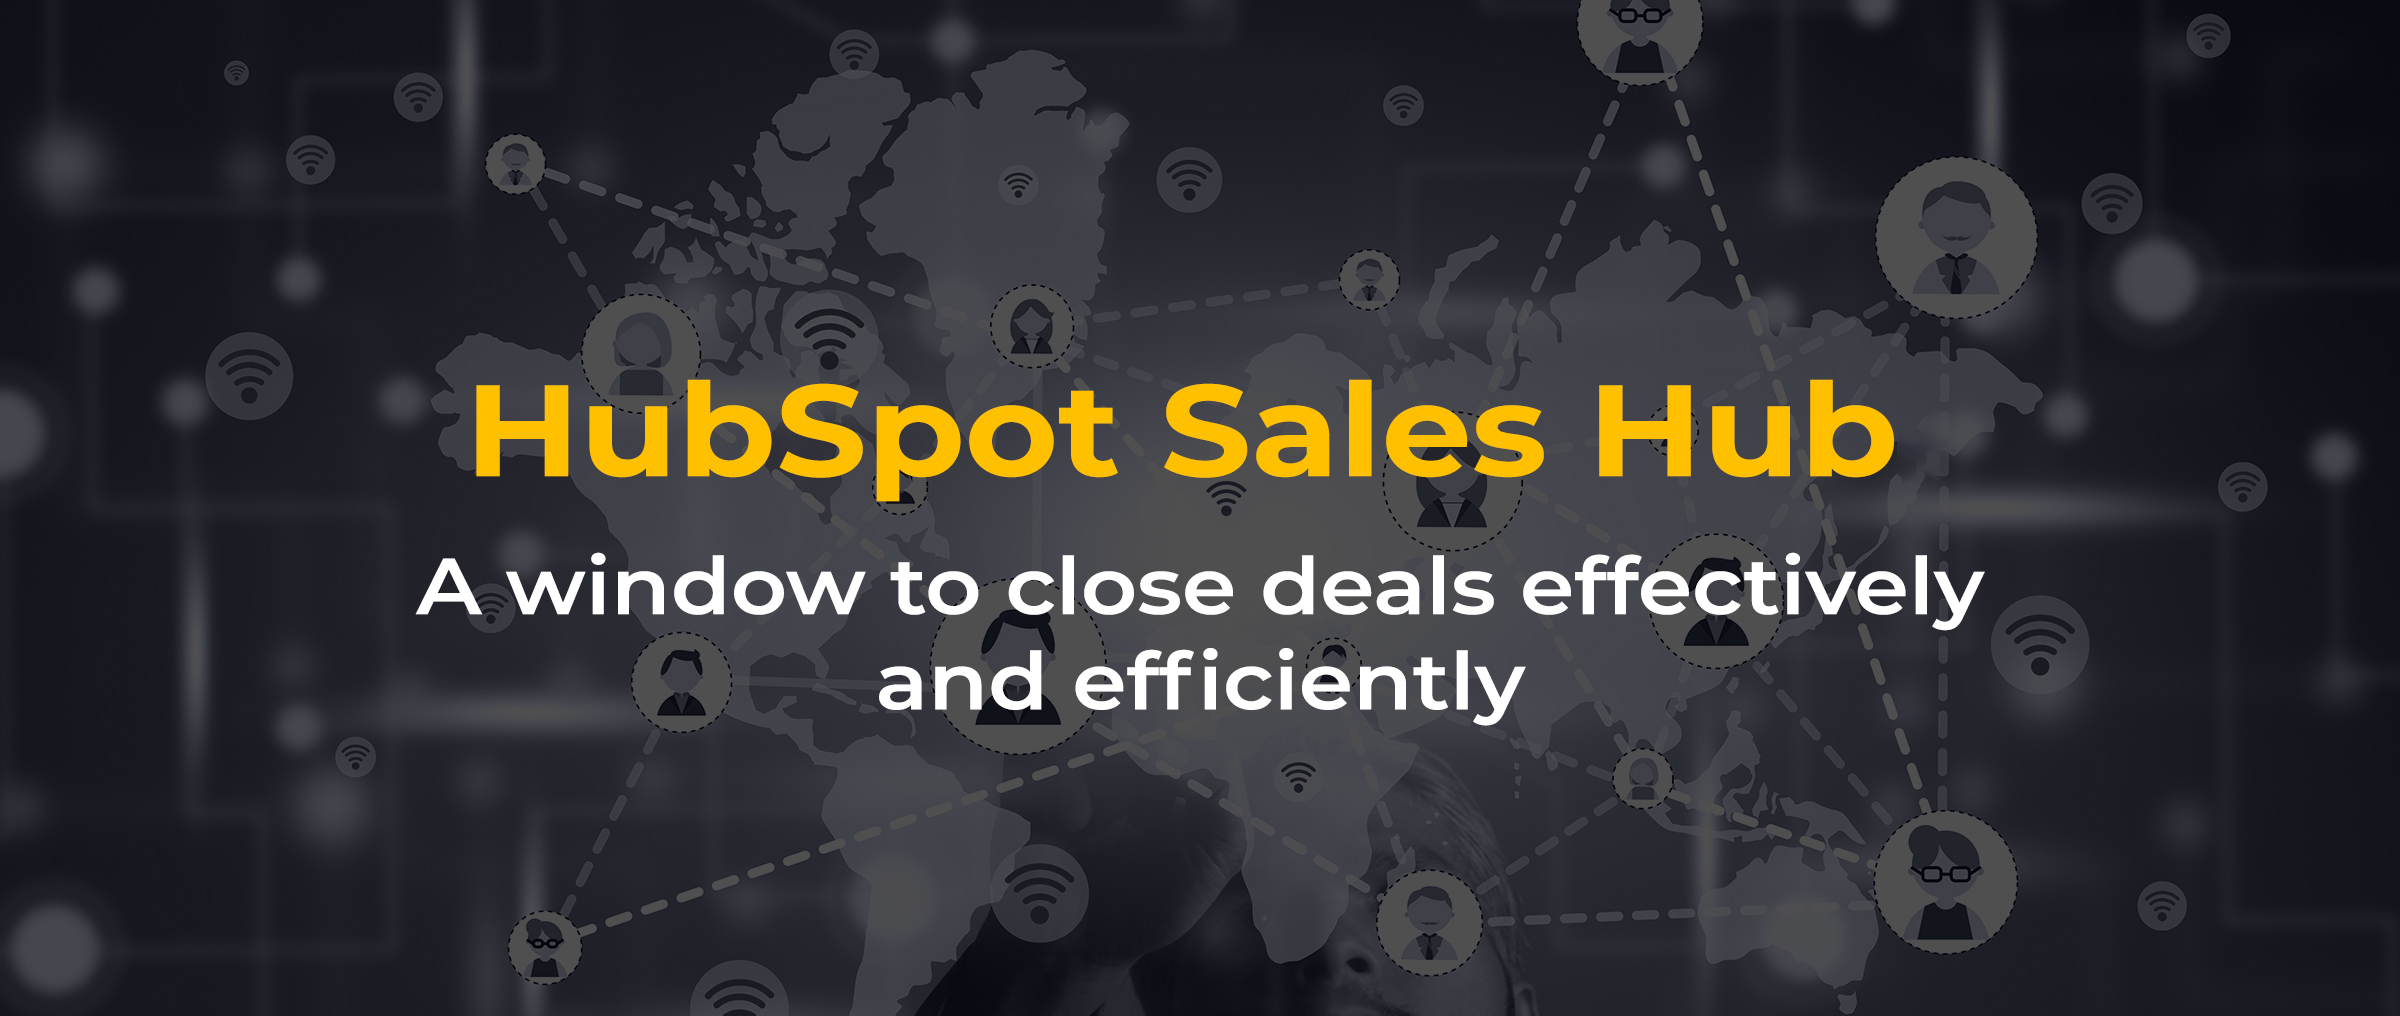 HubSpot Sales Hub: A window to close deals effectively and efficiently